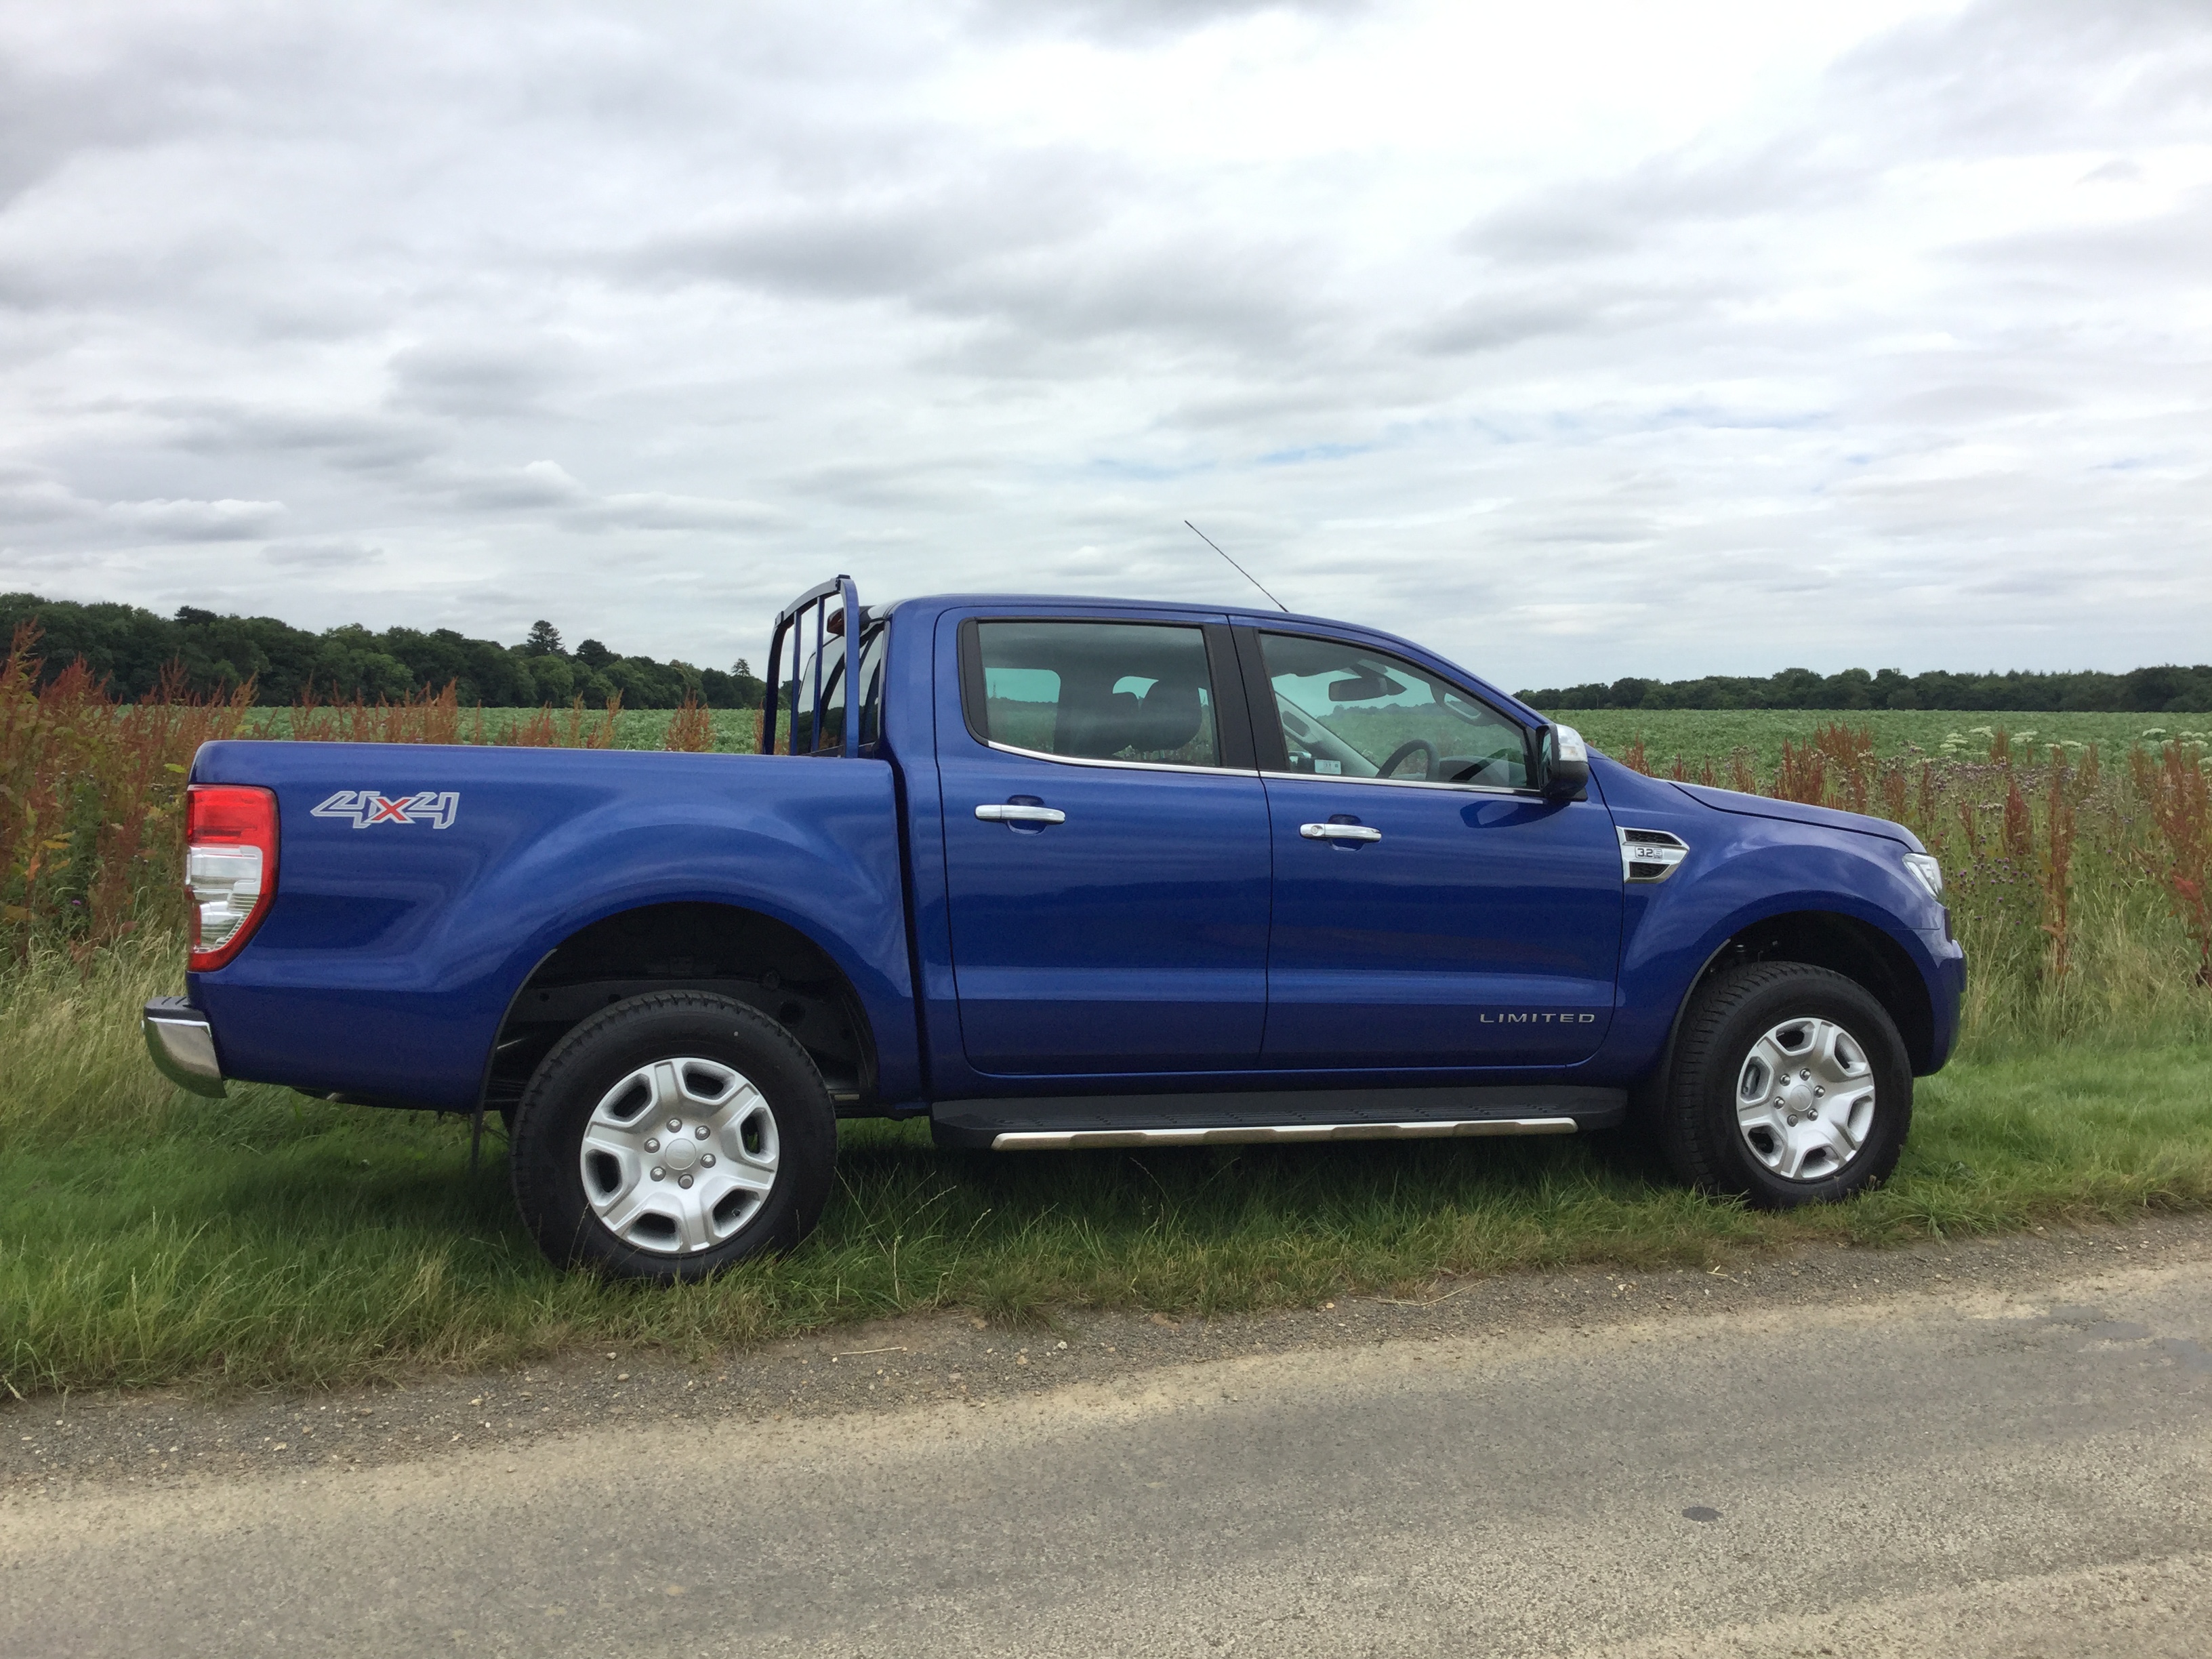 Ford Ranger Double Cab modern 2018